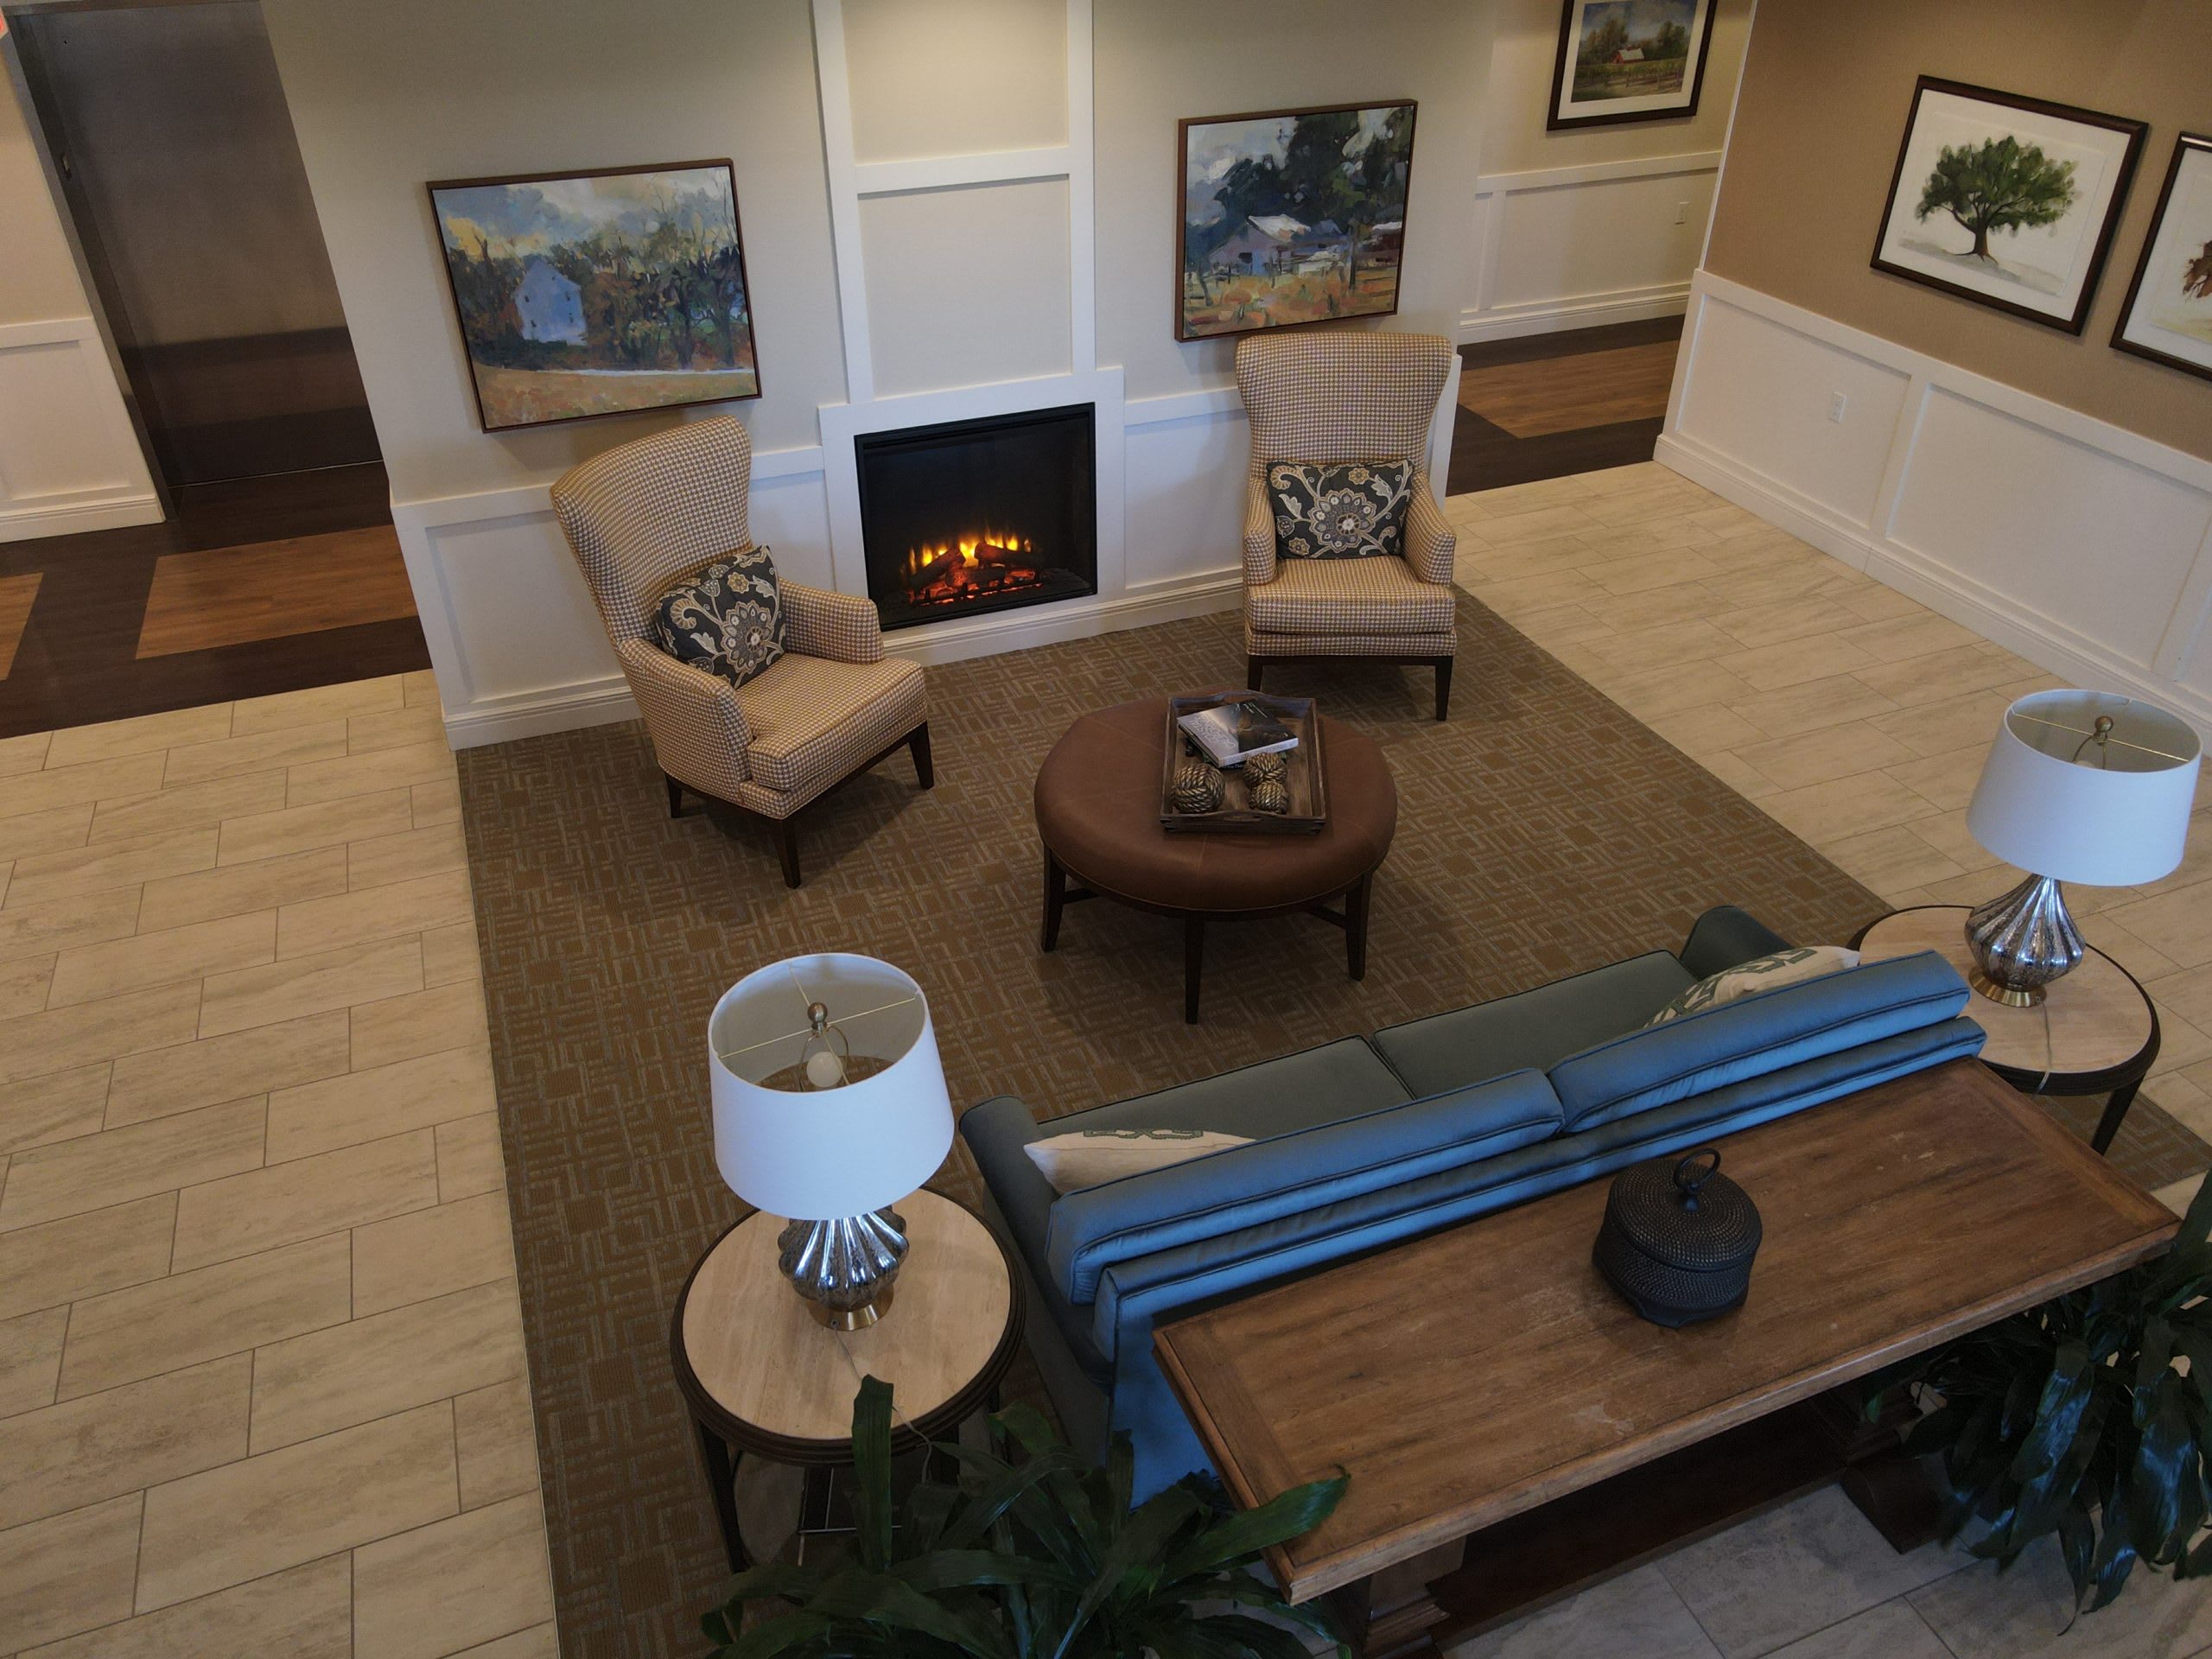 The Township Senior Living indoor common area